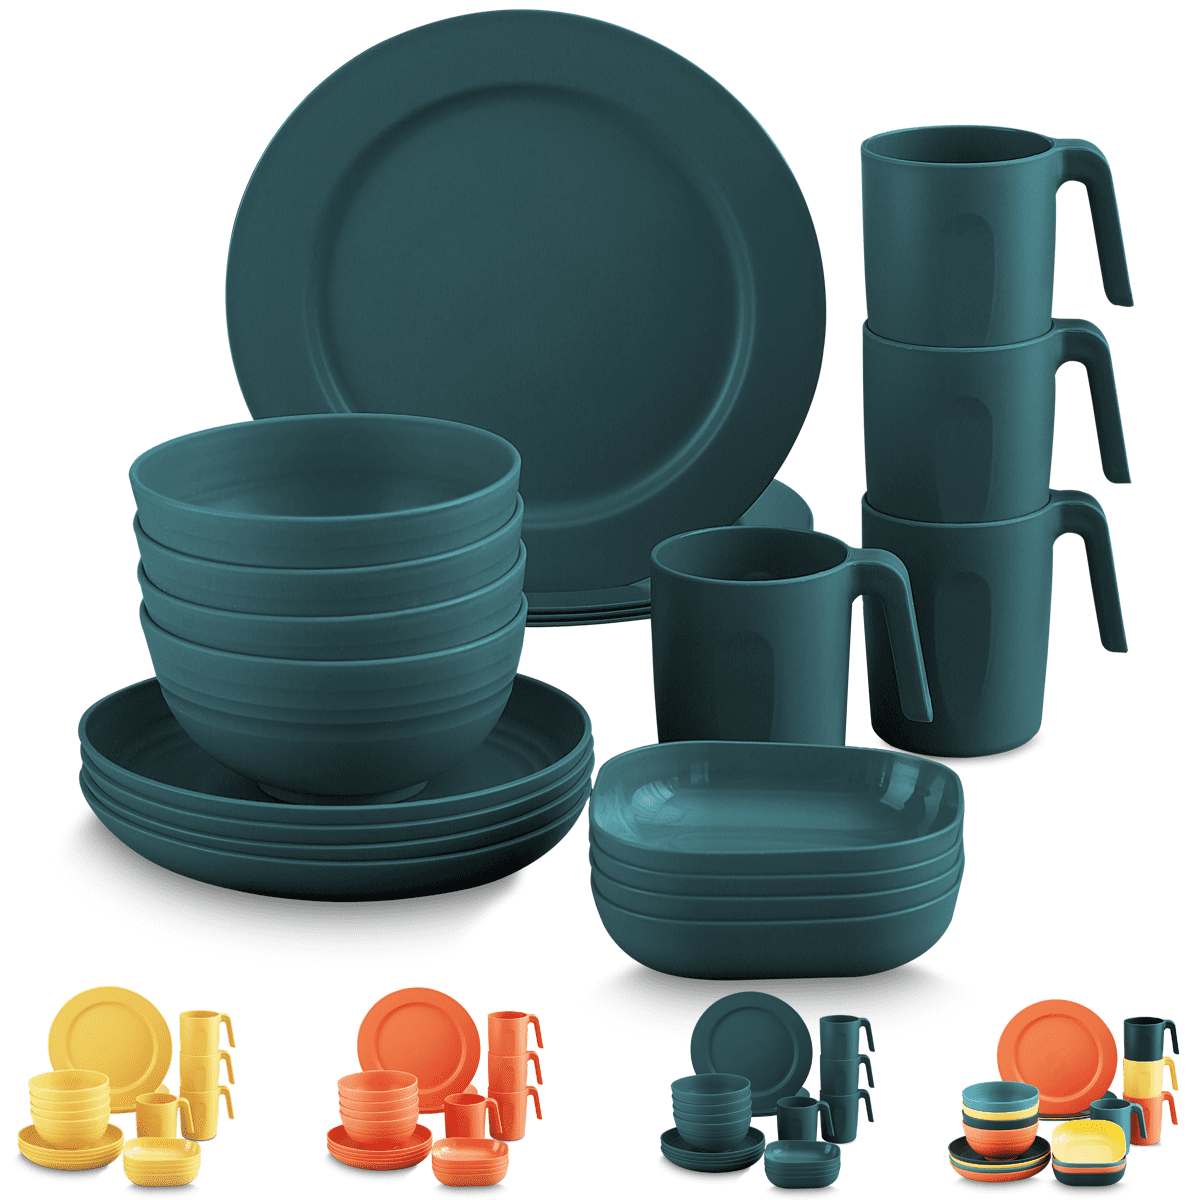 Set of 4 Childrens Picnic Camping Plastic Plates Bowls Tumblers Teal 